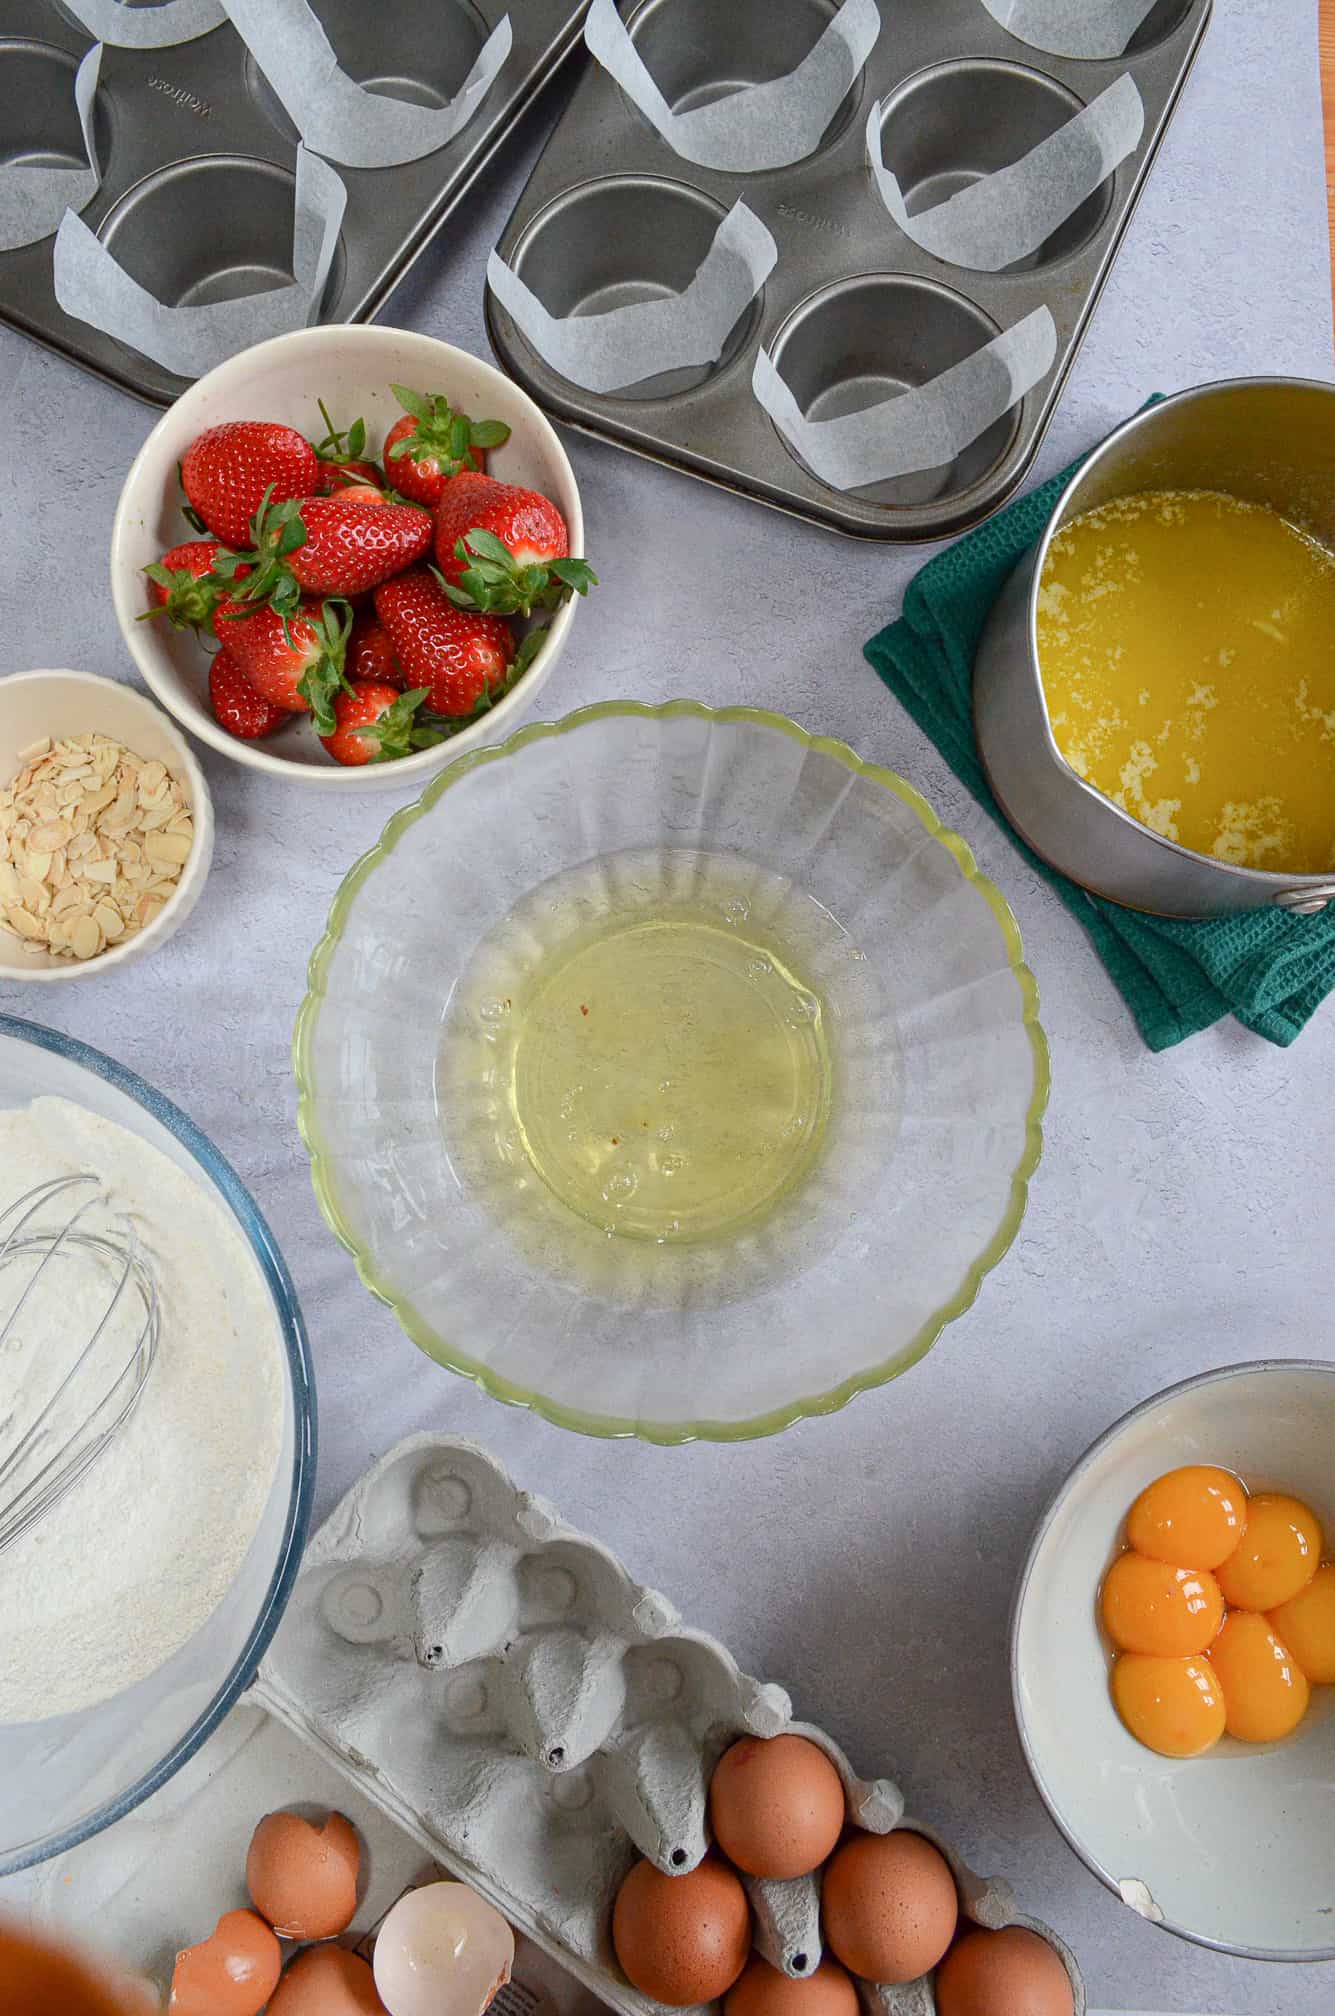 egg whites in large bowl with strawberries and other ingredients surrounding